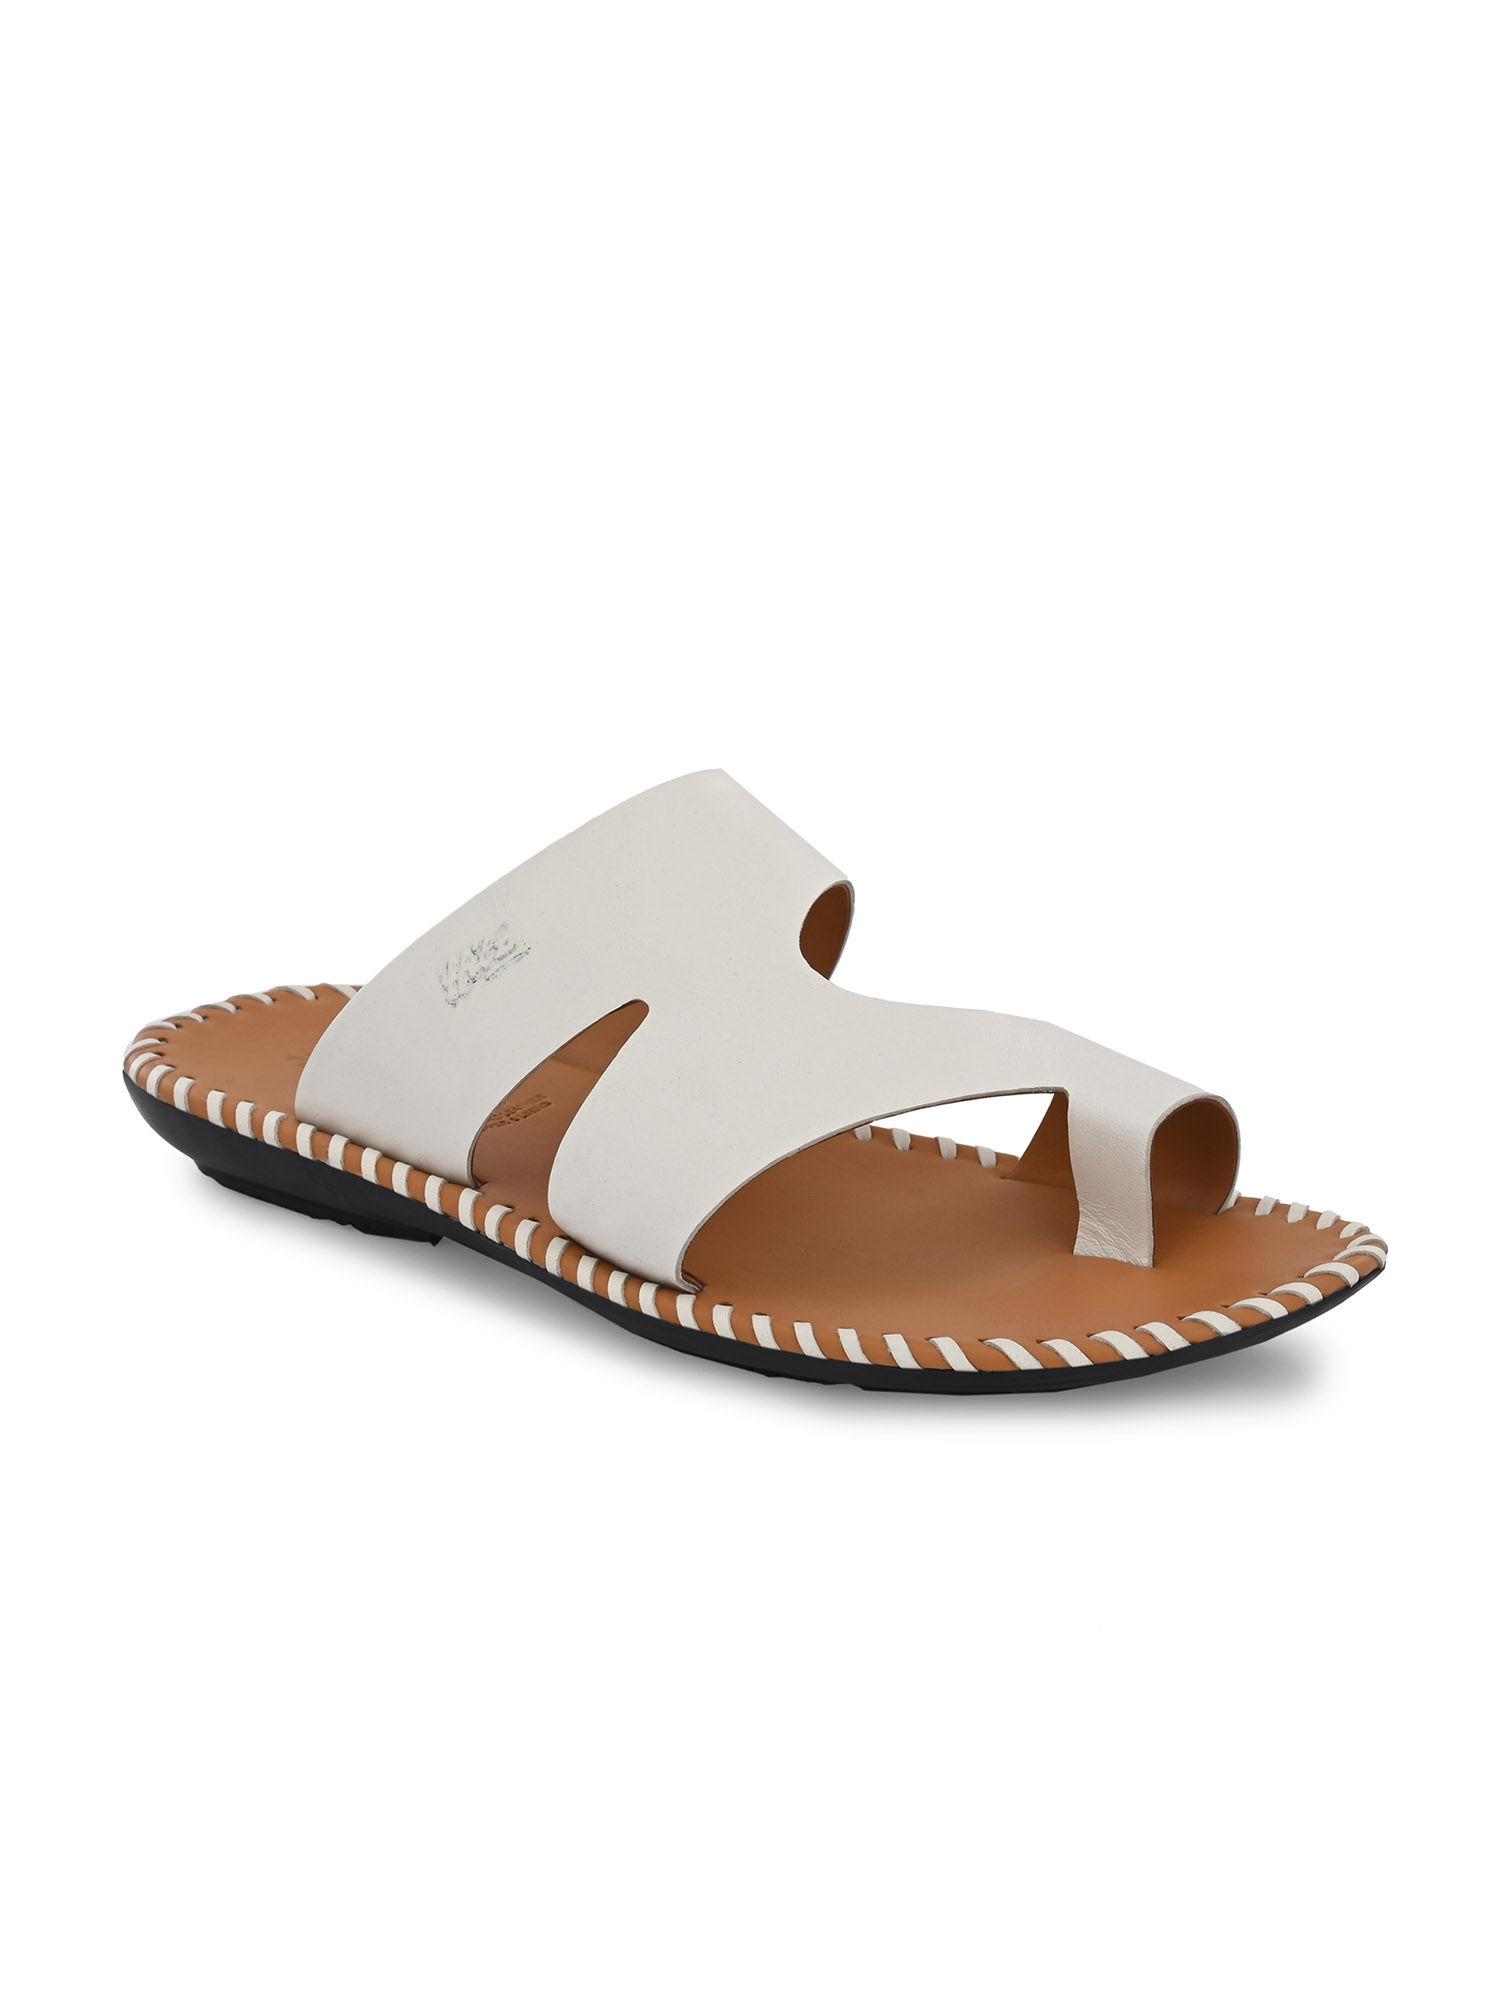 men's white leather casual toe-ring slippers